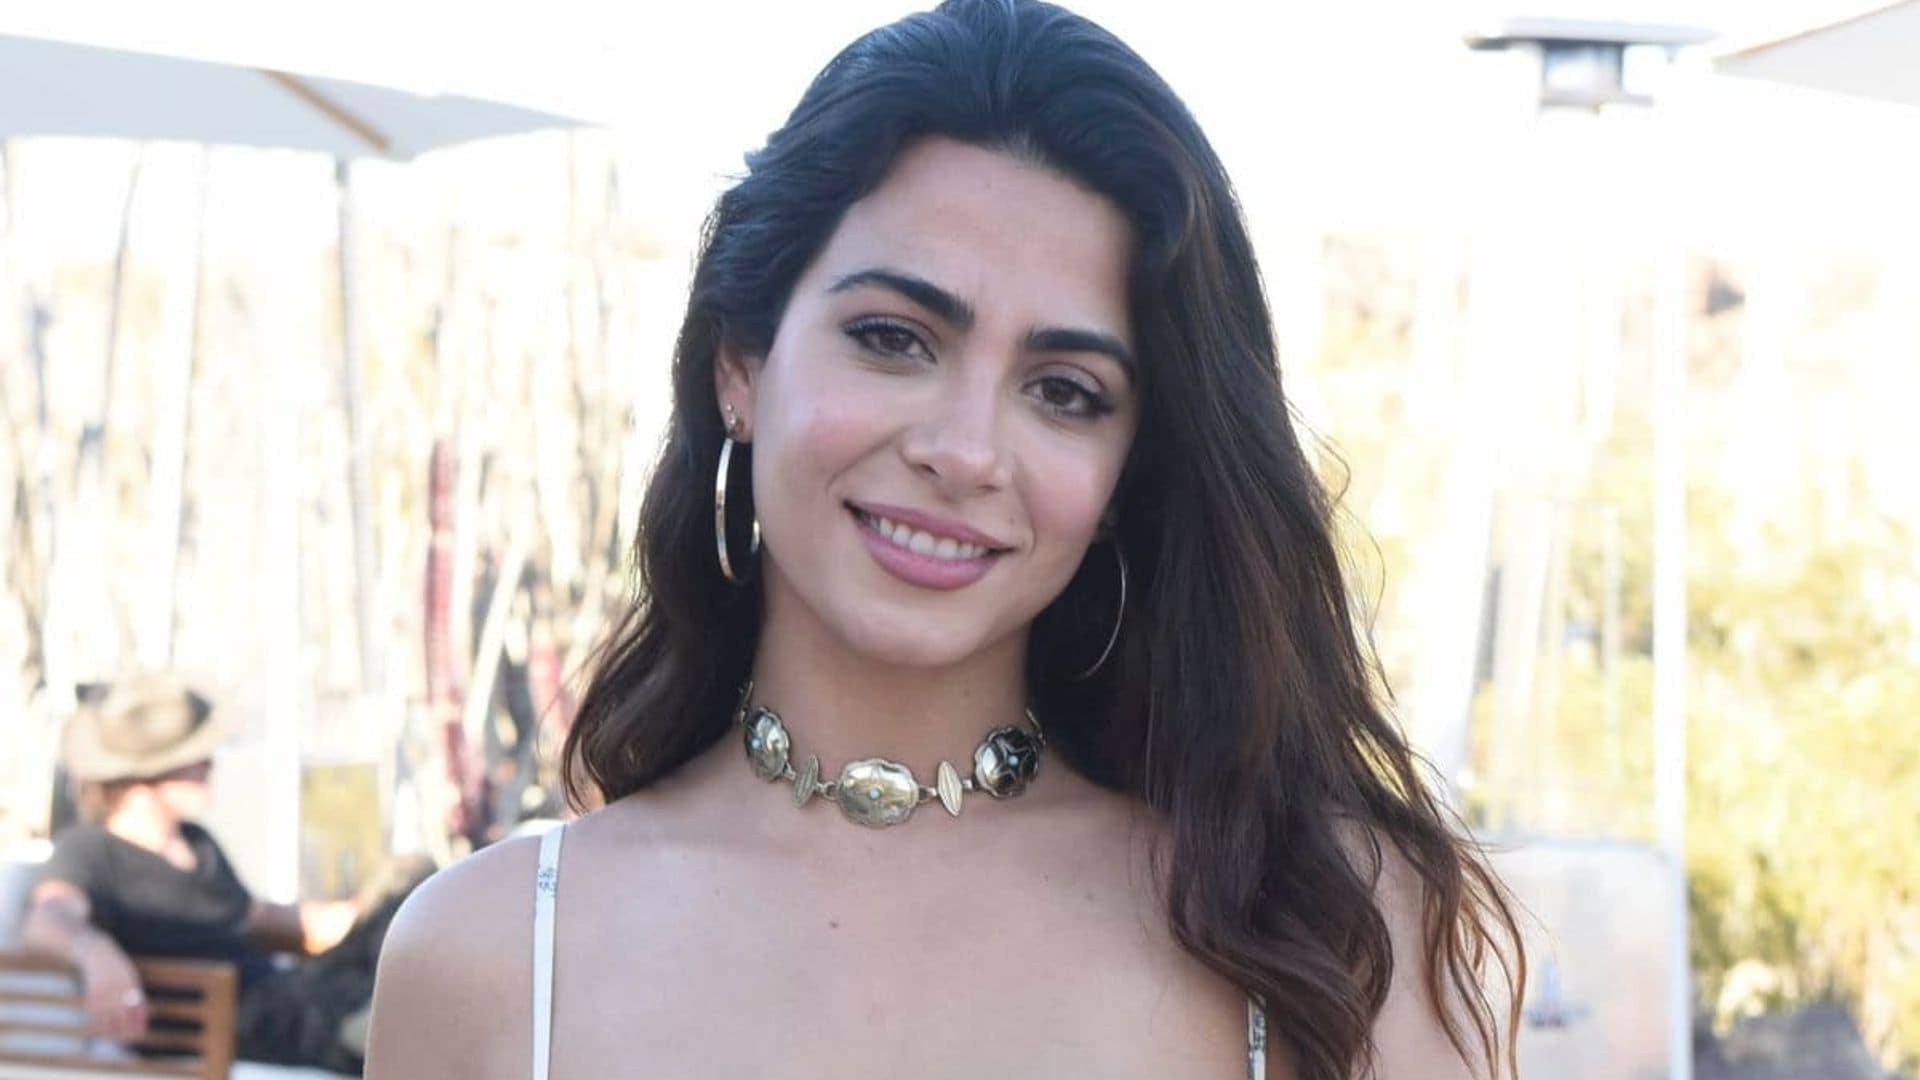 Emeraude Toubia secures the female lead role in Amazon’s upcoming romantic comedy series, ‘With Love’